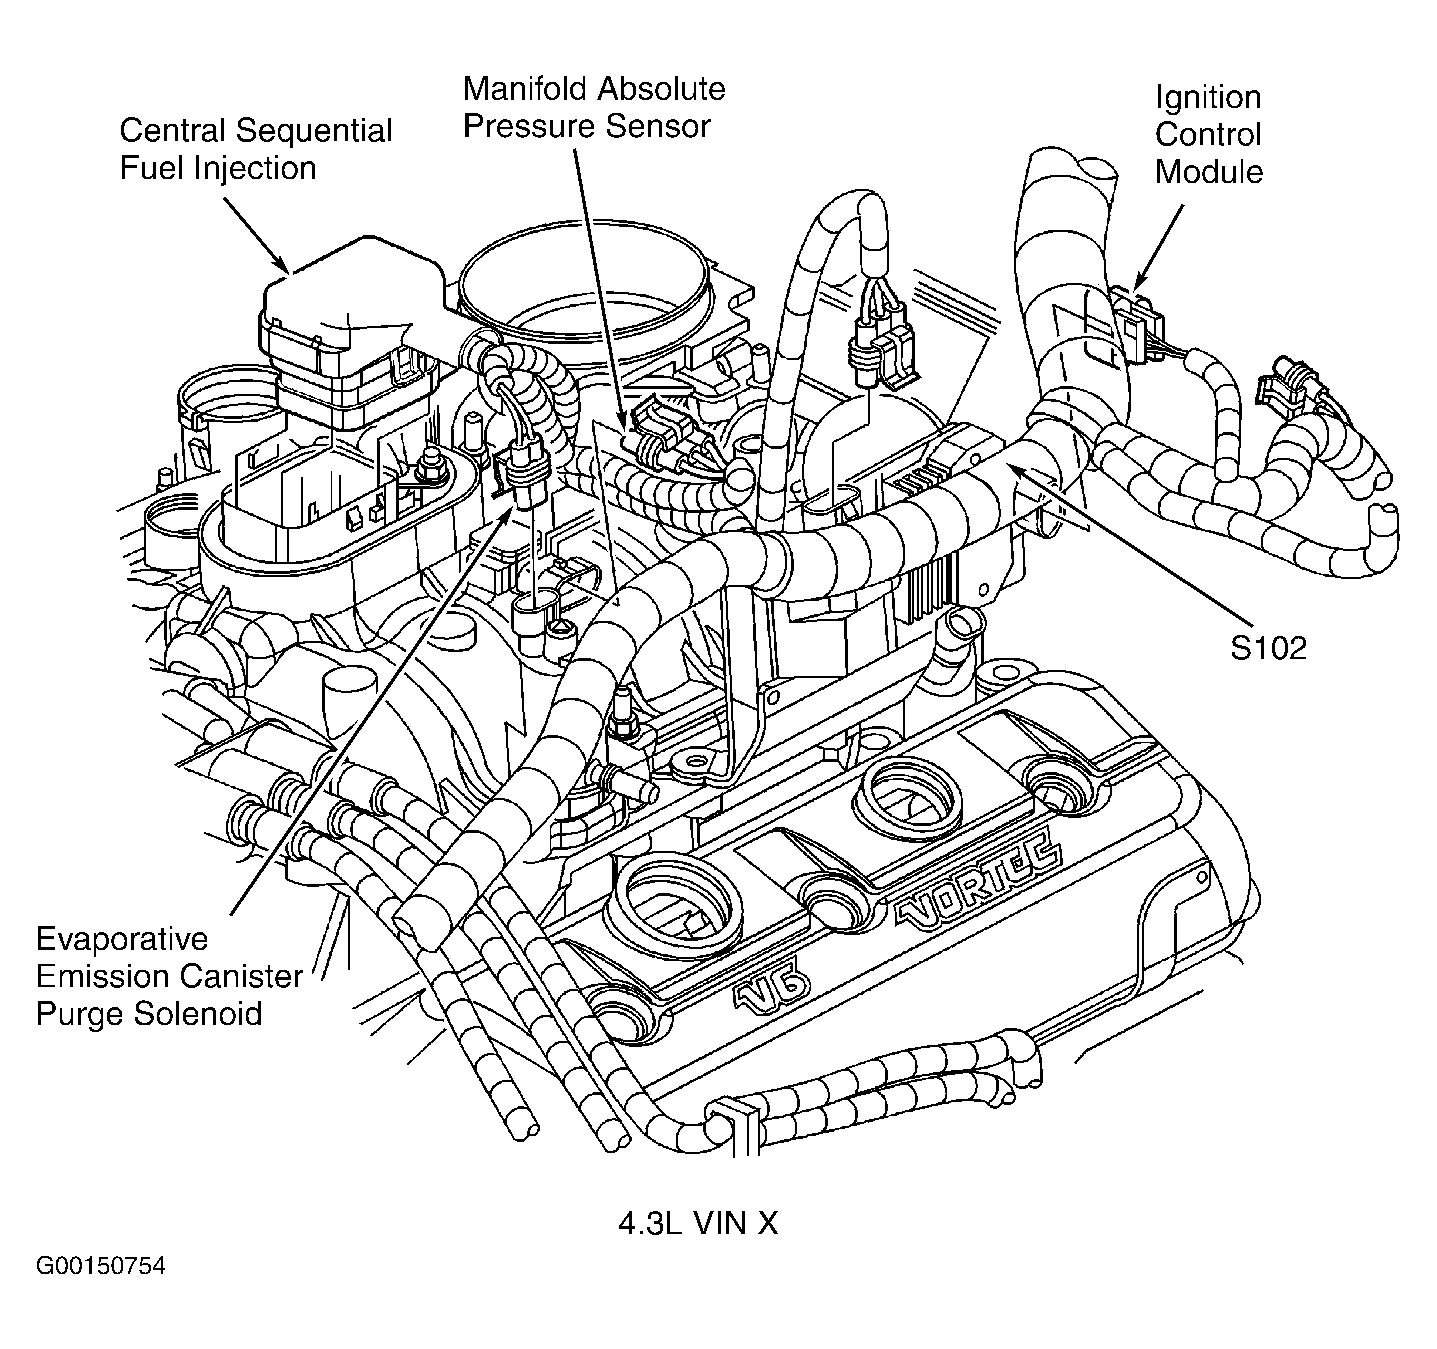 GMC Savana G3500 2003 - Component Locations -  Top Right Side Of Engine (4.3L VIN X)